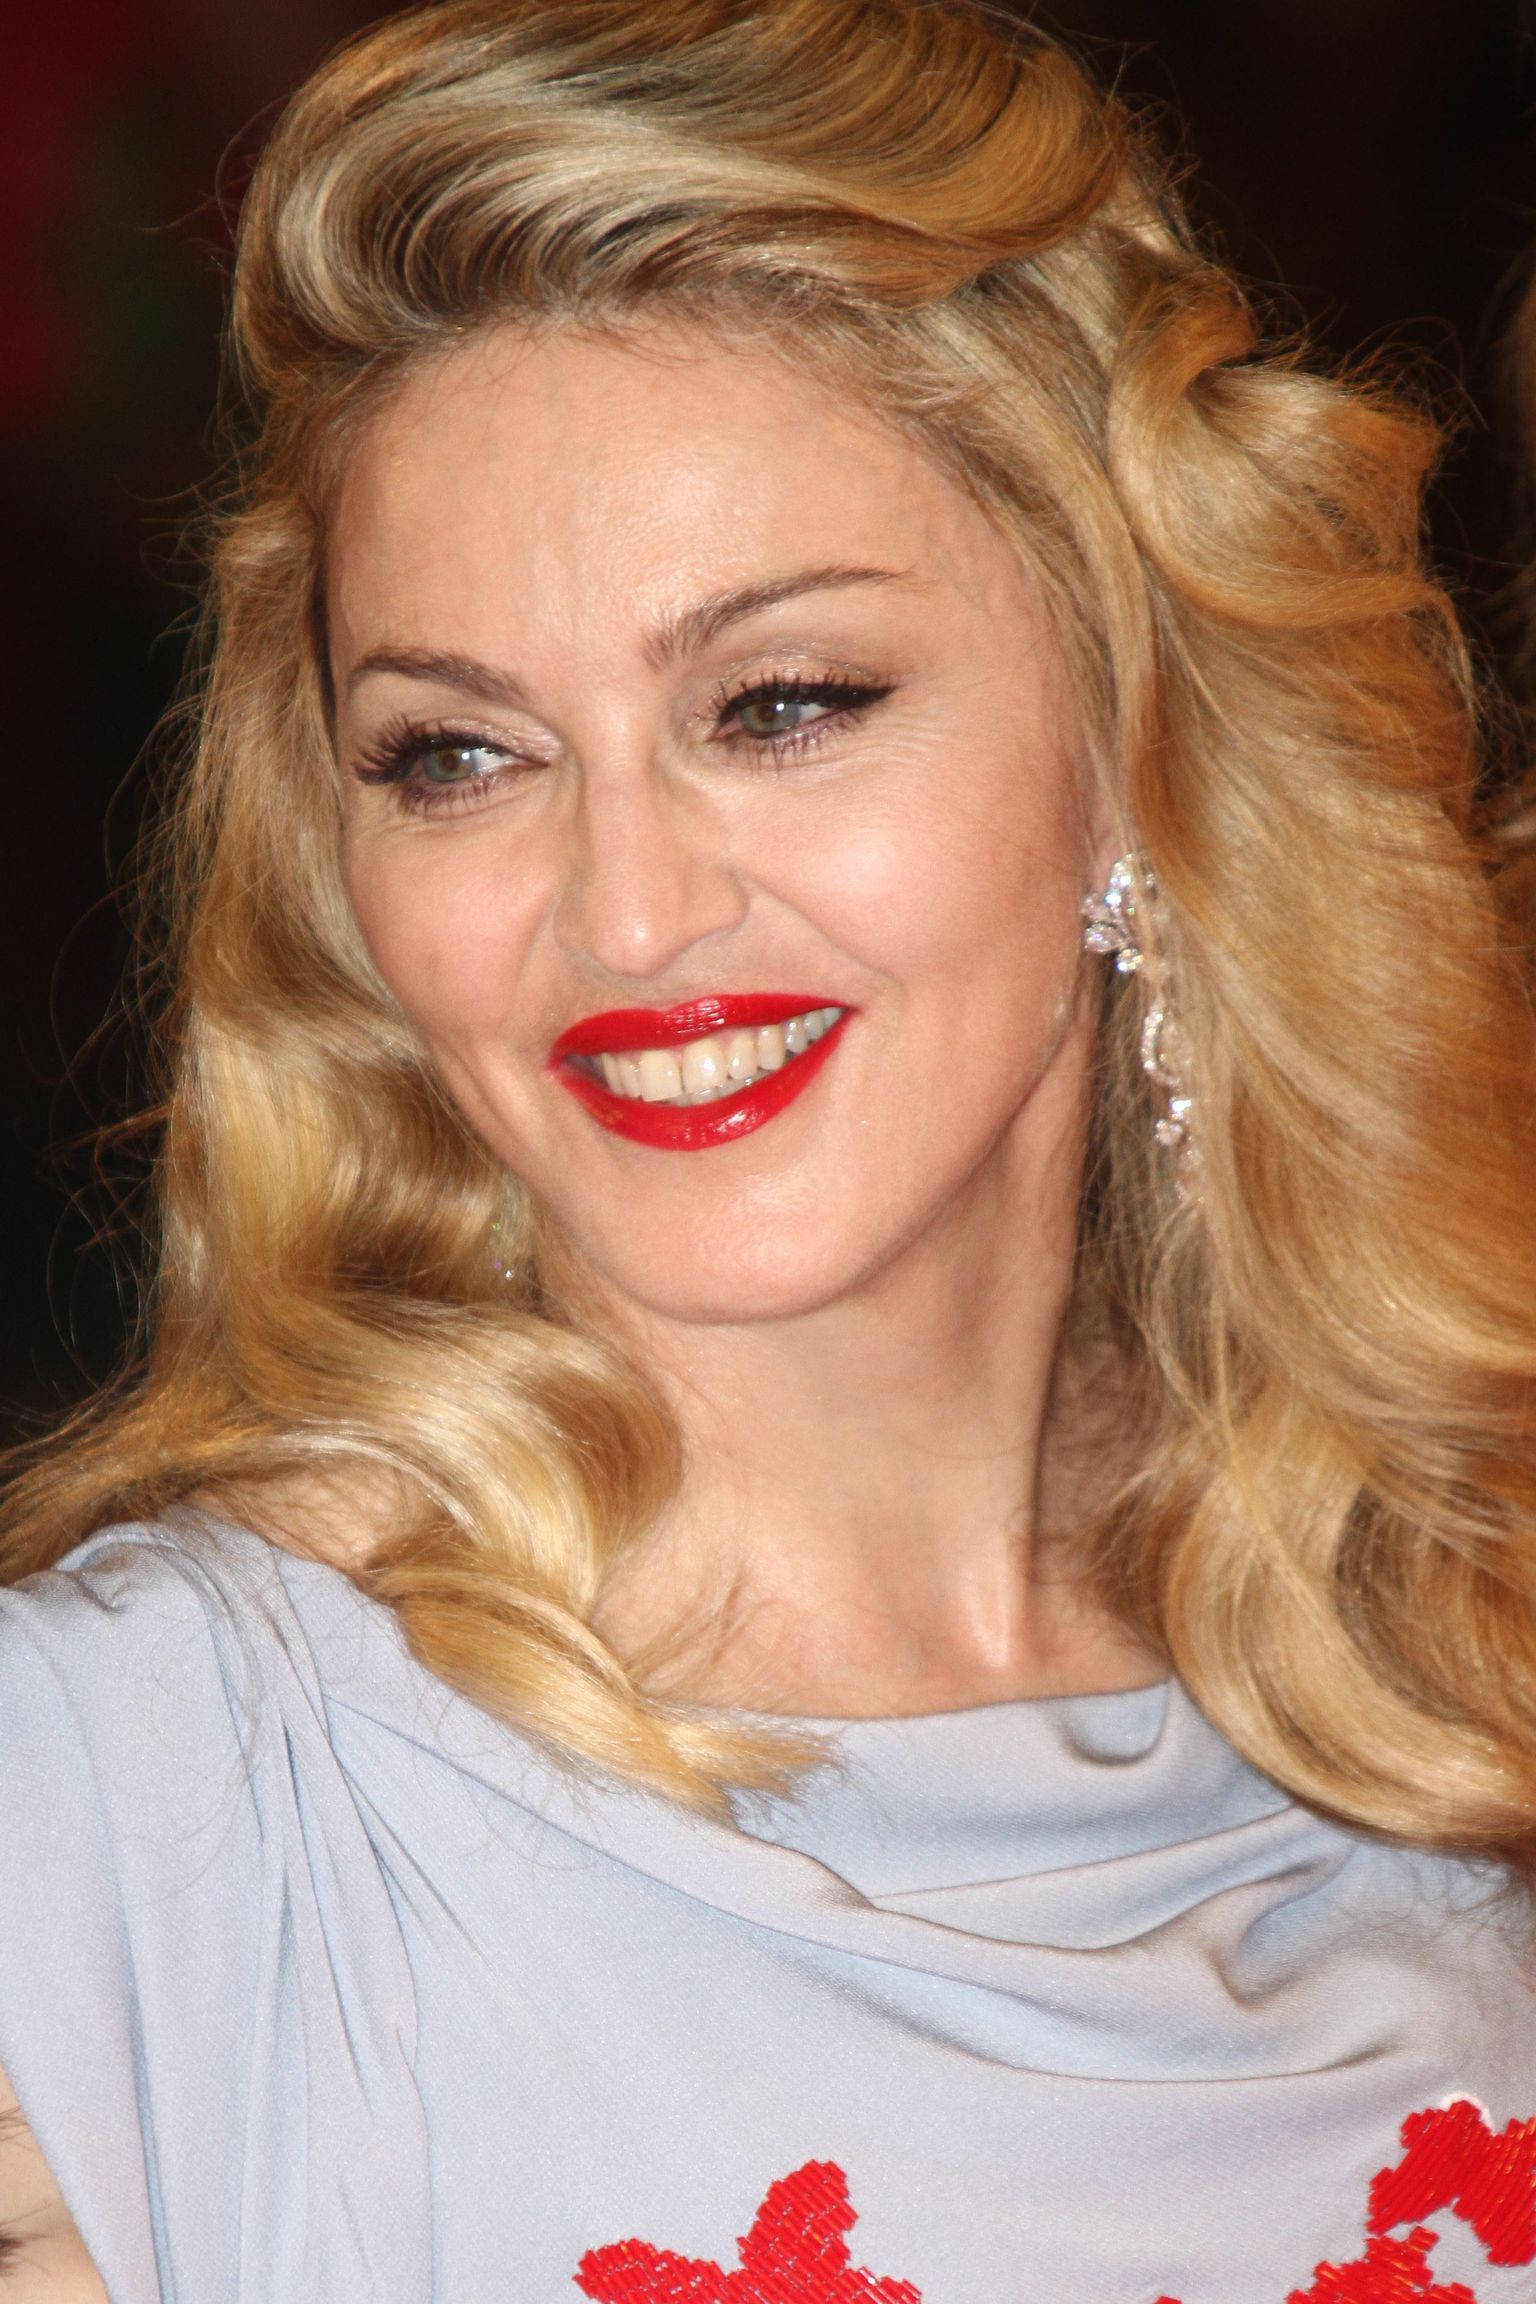 Madonna eleven years ago, aged 51. Looking immense!